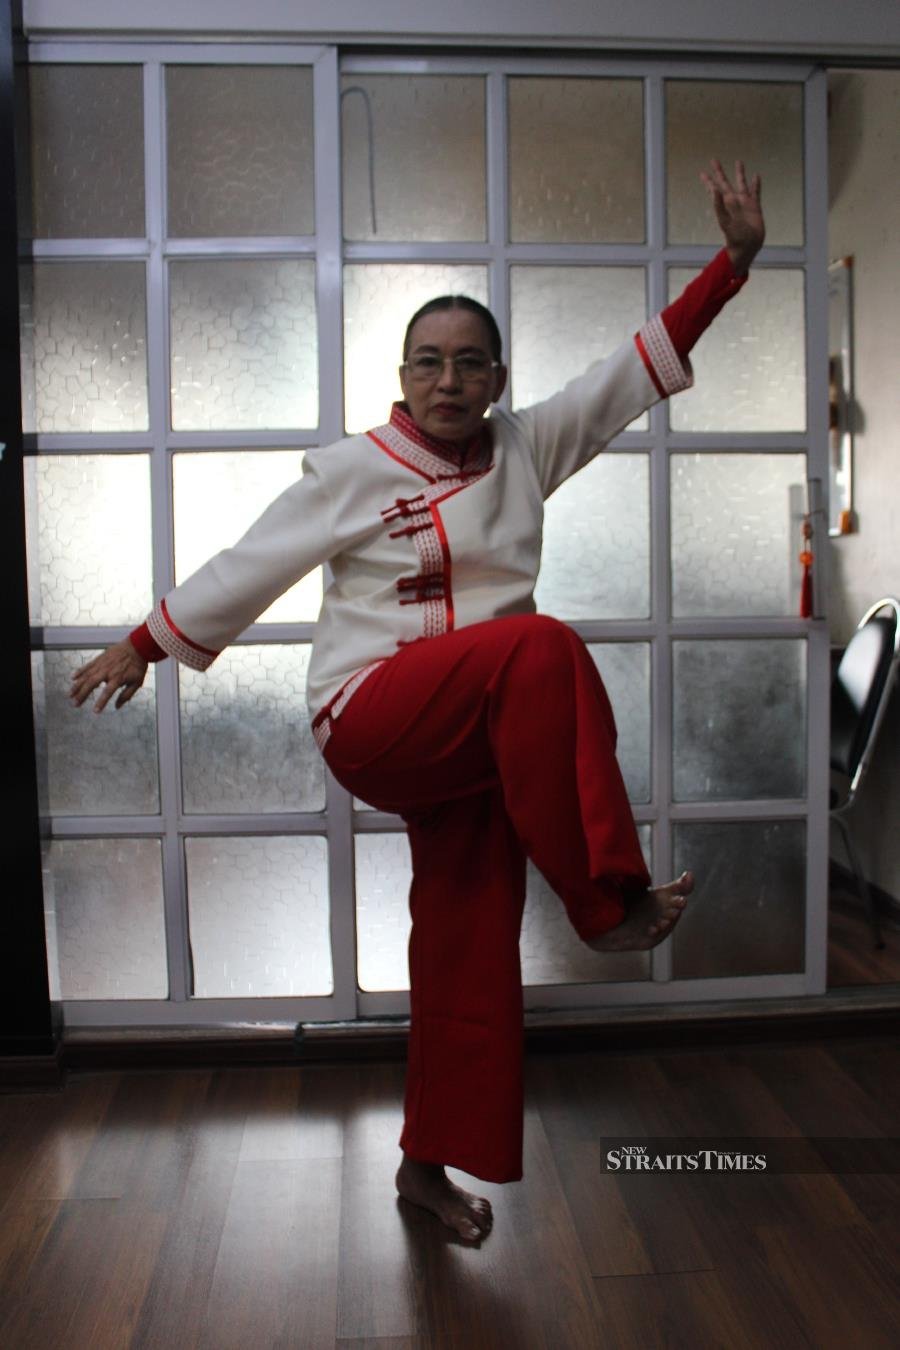  Thein shows a Thaing movement in her combat uniform.